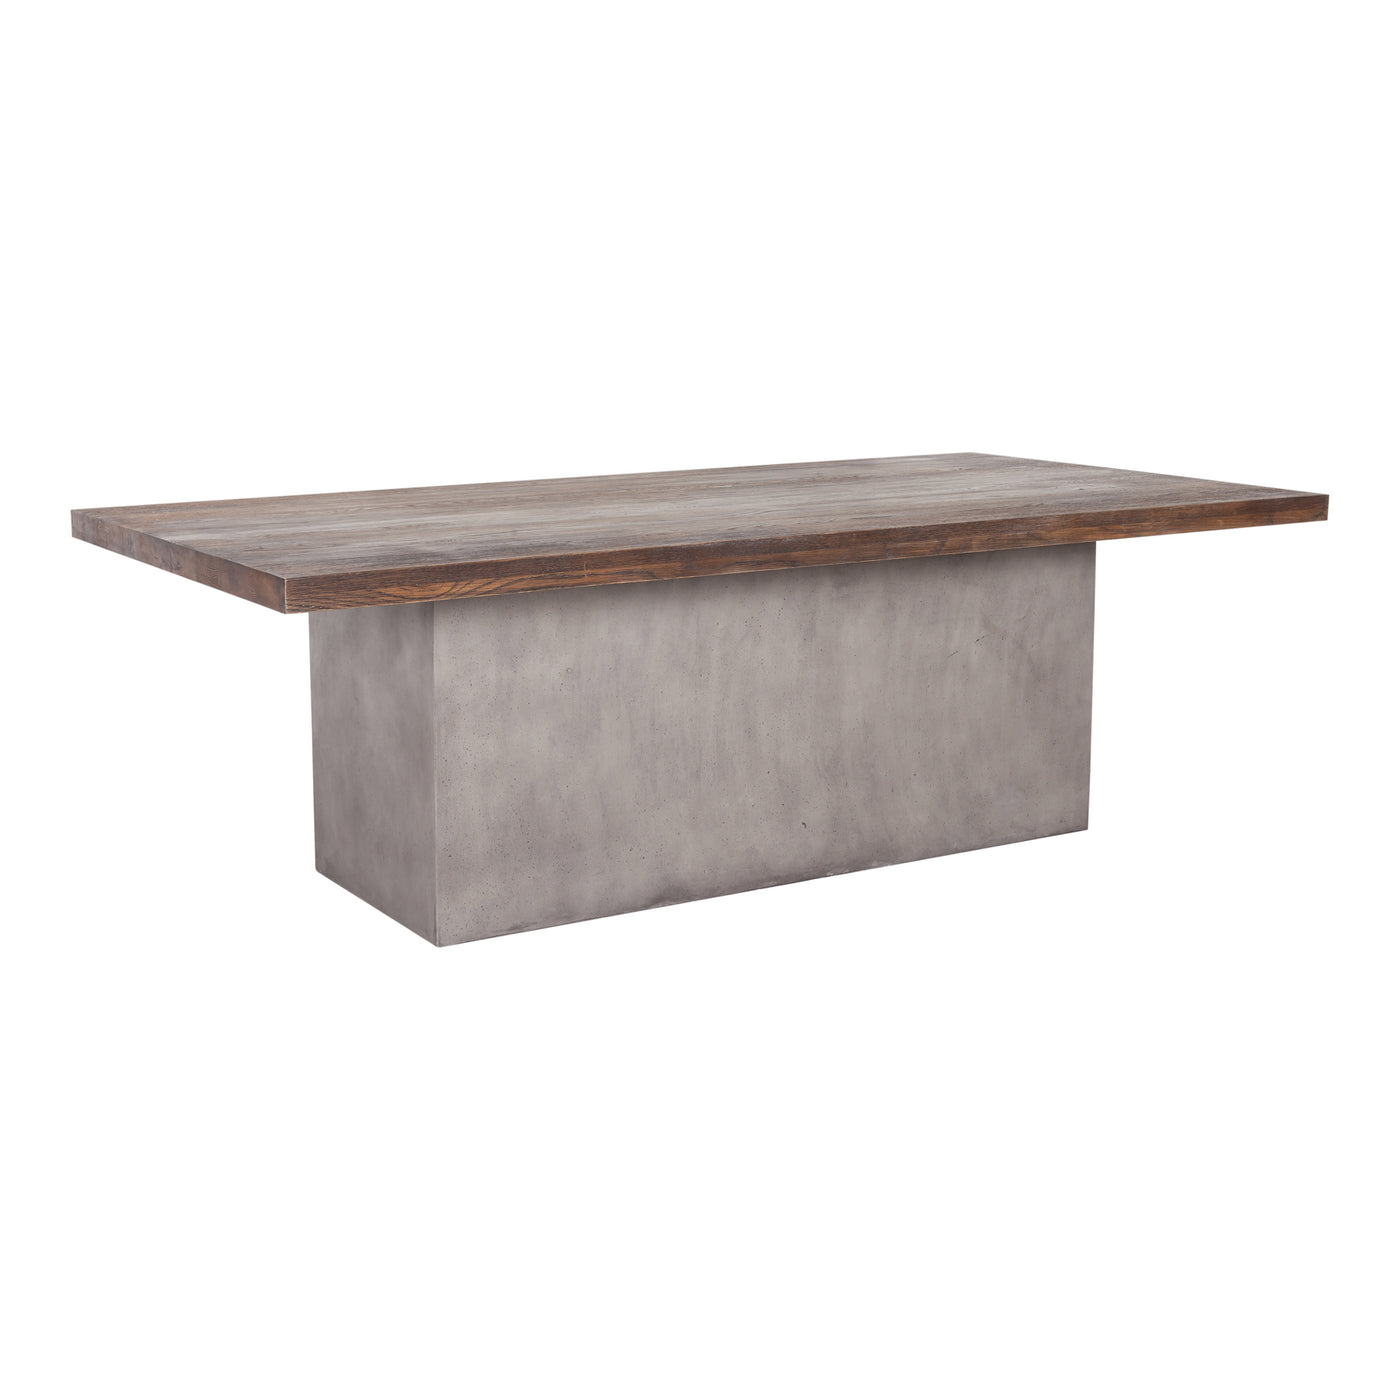 Naturally gorgeous! The Kaia Table features a thick, solid oak top, set on a base of fiber reinforced concrete.
<h6>Dimens...